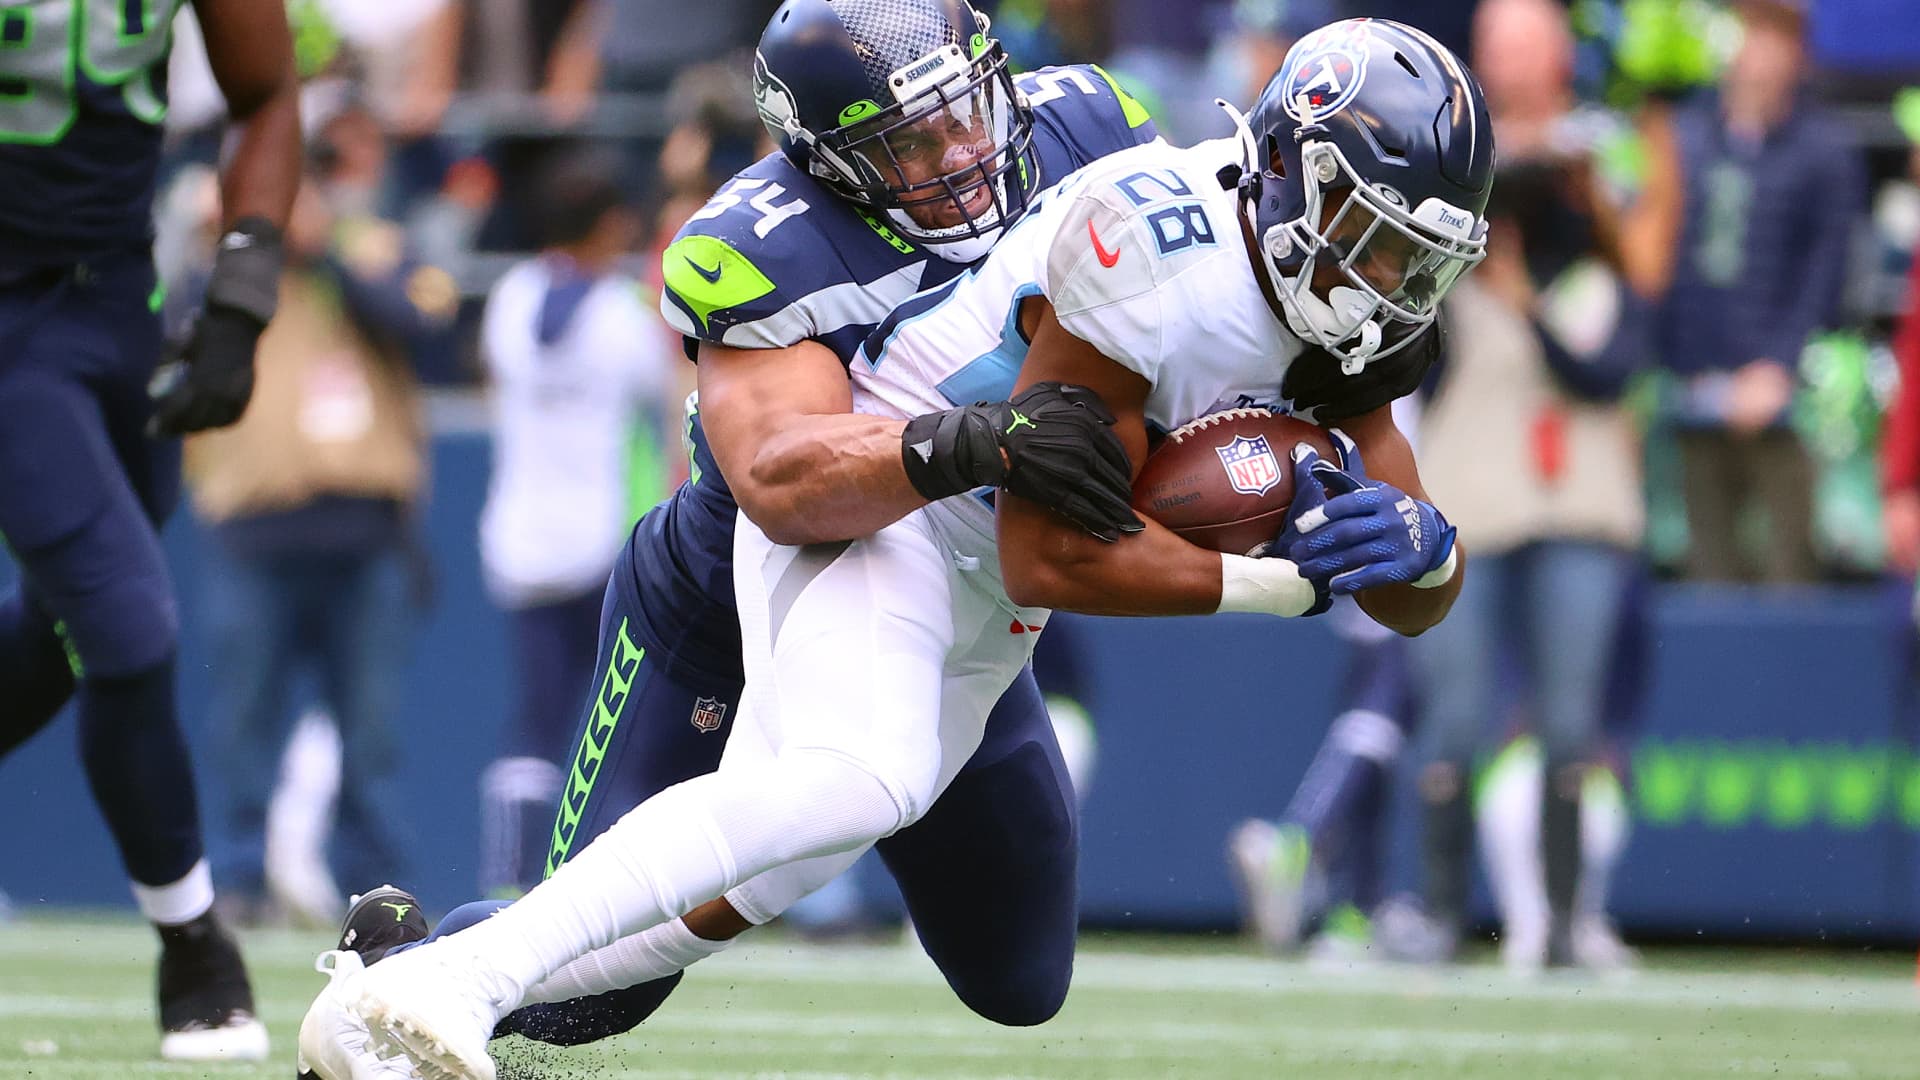 Jeremy McNichols #28 of the Tennessee Titans is tackled by Bobby Wagner #54 of the Seattle Seahawks during the fourth quarter at Lumen Field on September 19, 2021 in Seattle, Washington.